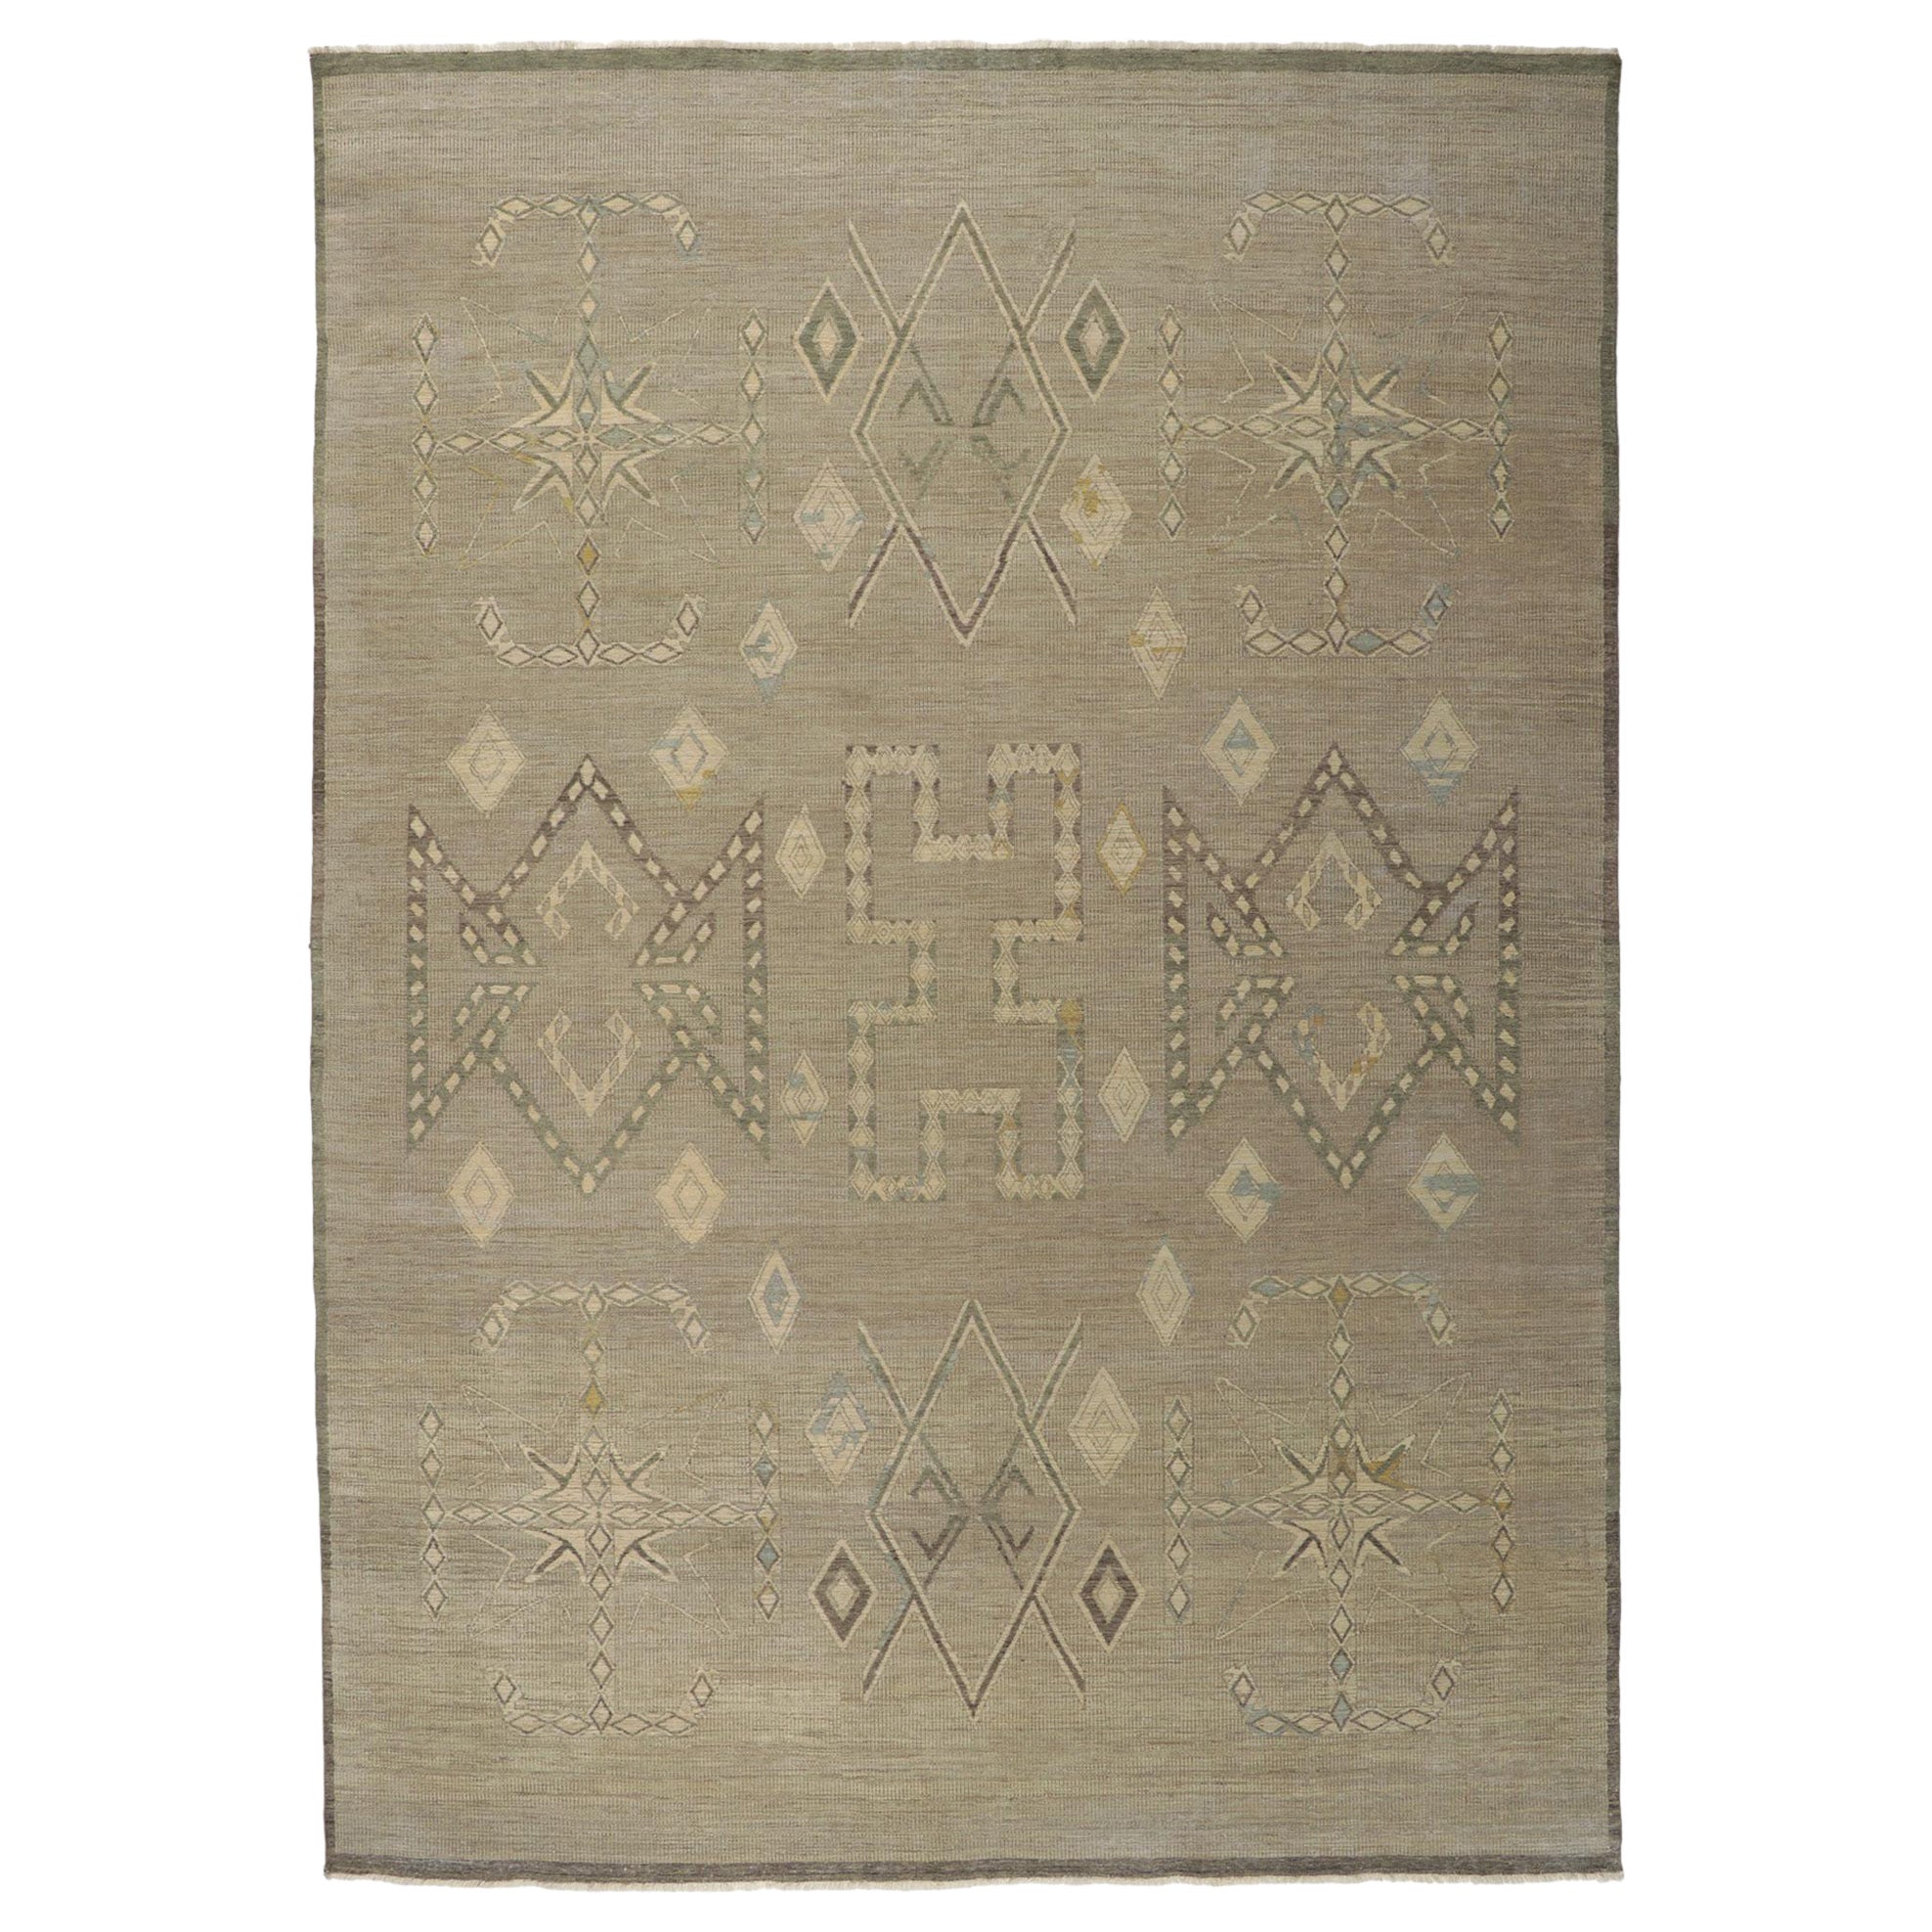 Vintage-Inspired Distressed Rug with Tribal Style  For Sale